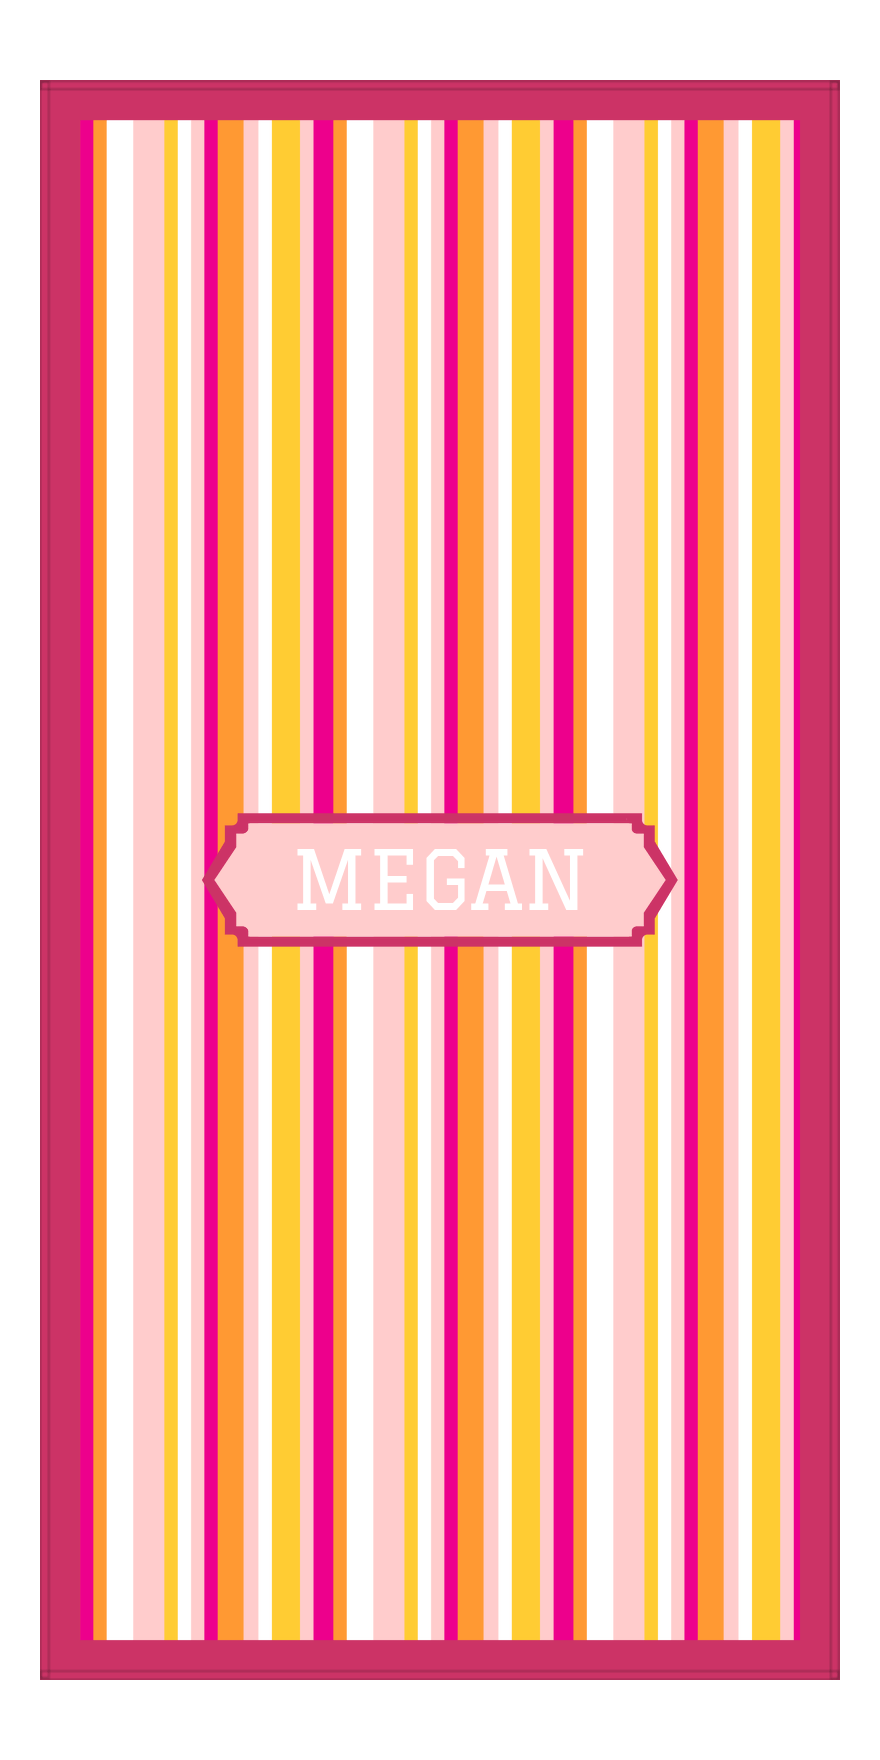 Personalized 5 Color Stripes 3 Repeat Beach Towel - Vertical - Pink and Orange - Oblong Frame - Front View